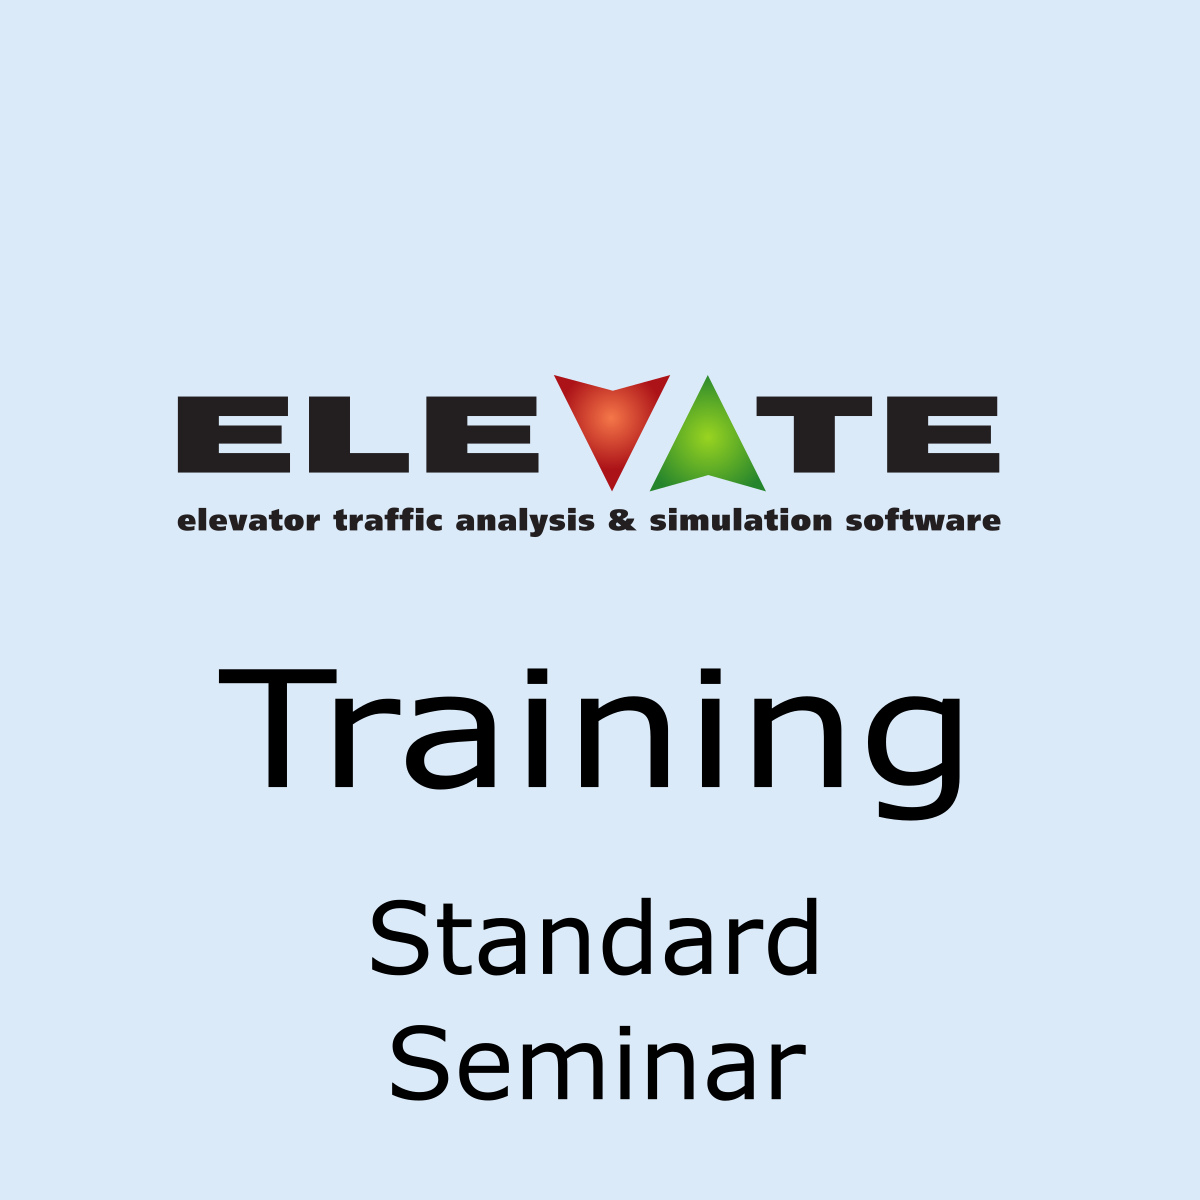 elevate elevator traffic analysis and simulation software